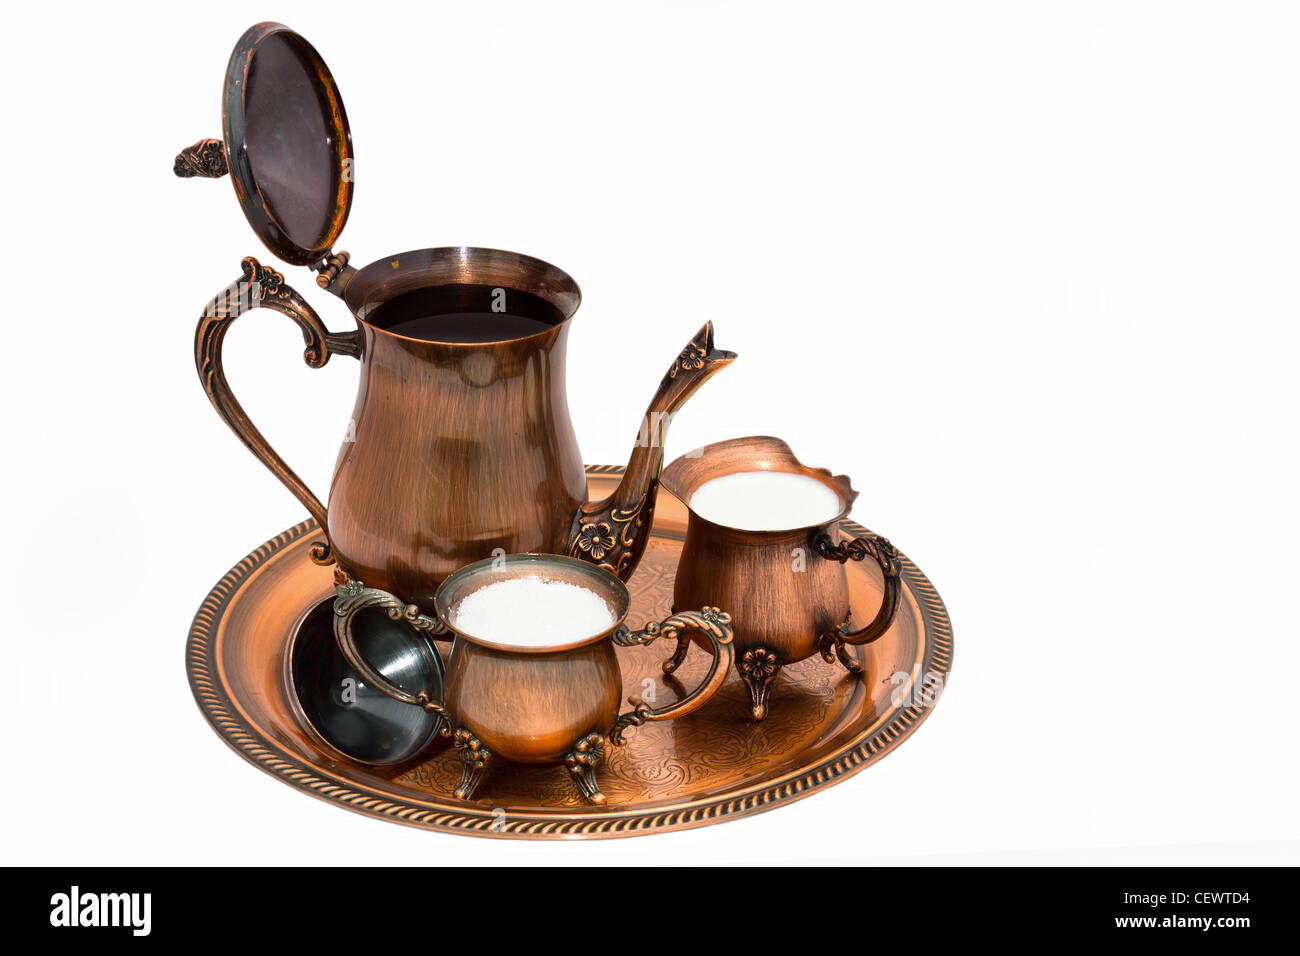 Evening with coffee. Copper coffee set. Retro style. Stock Photo